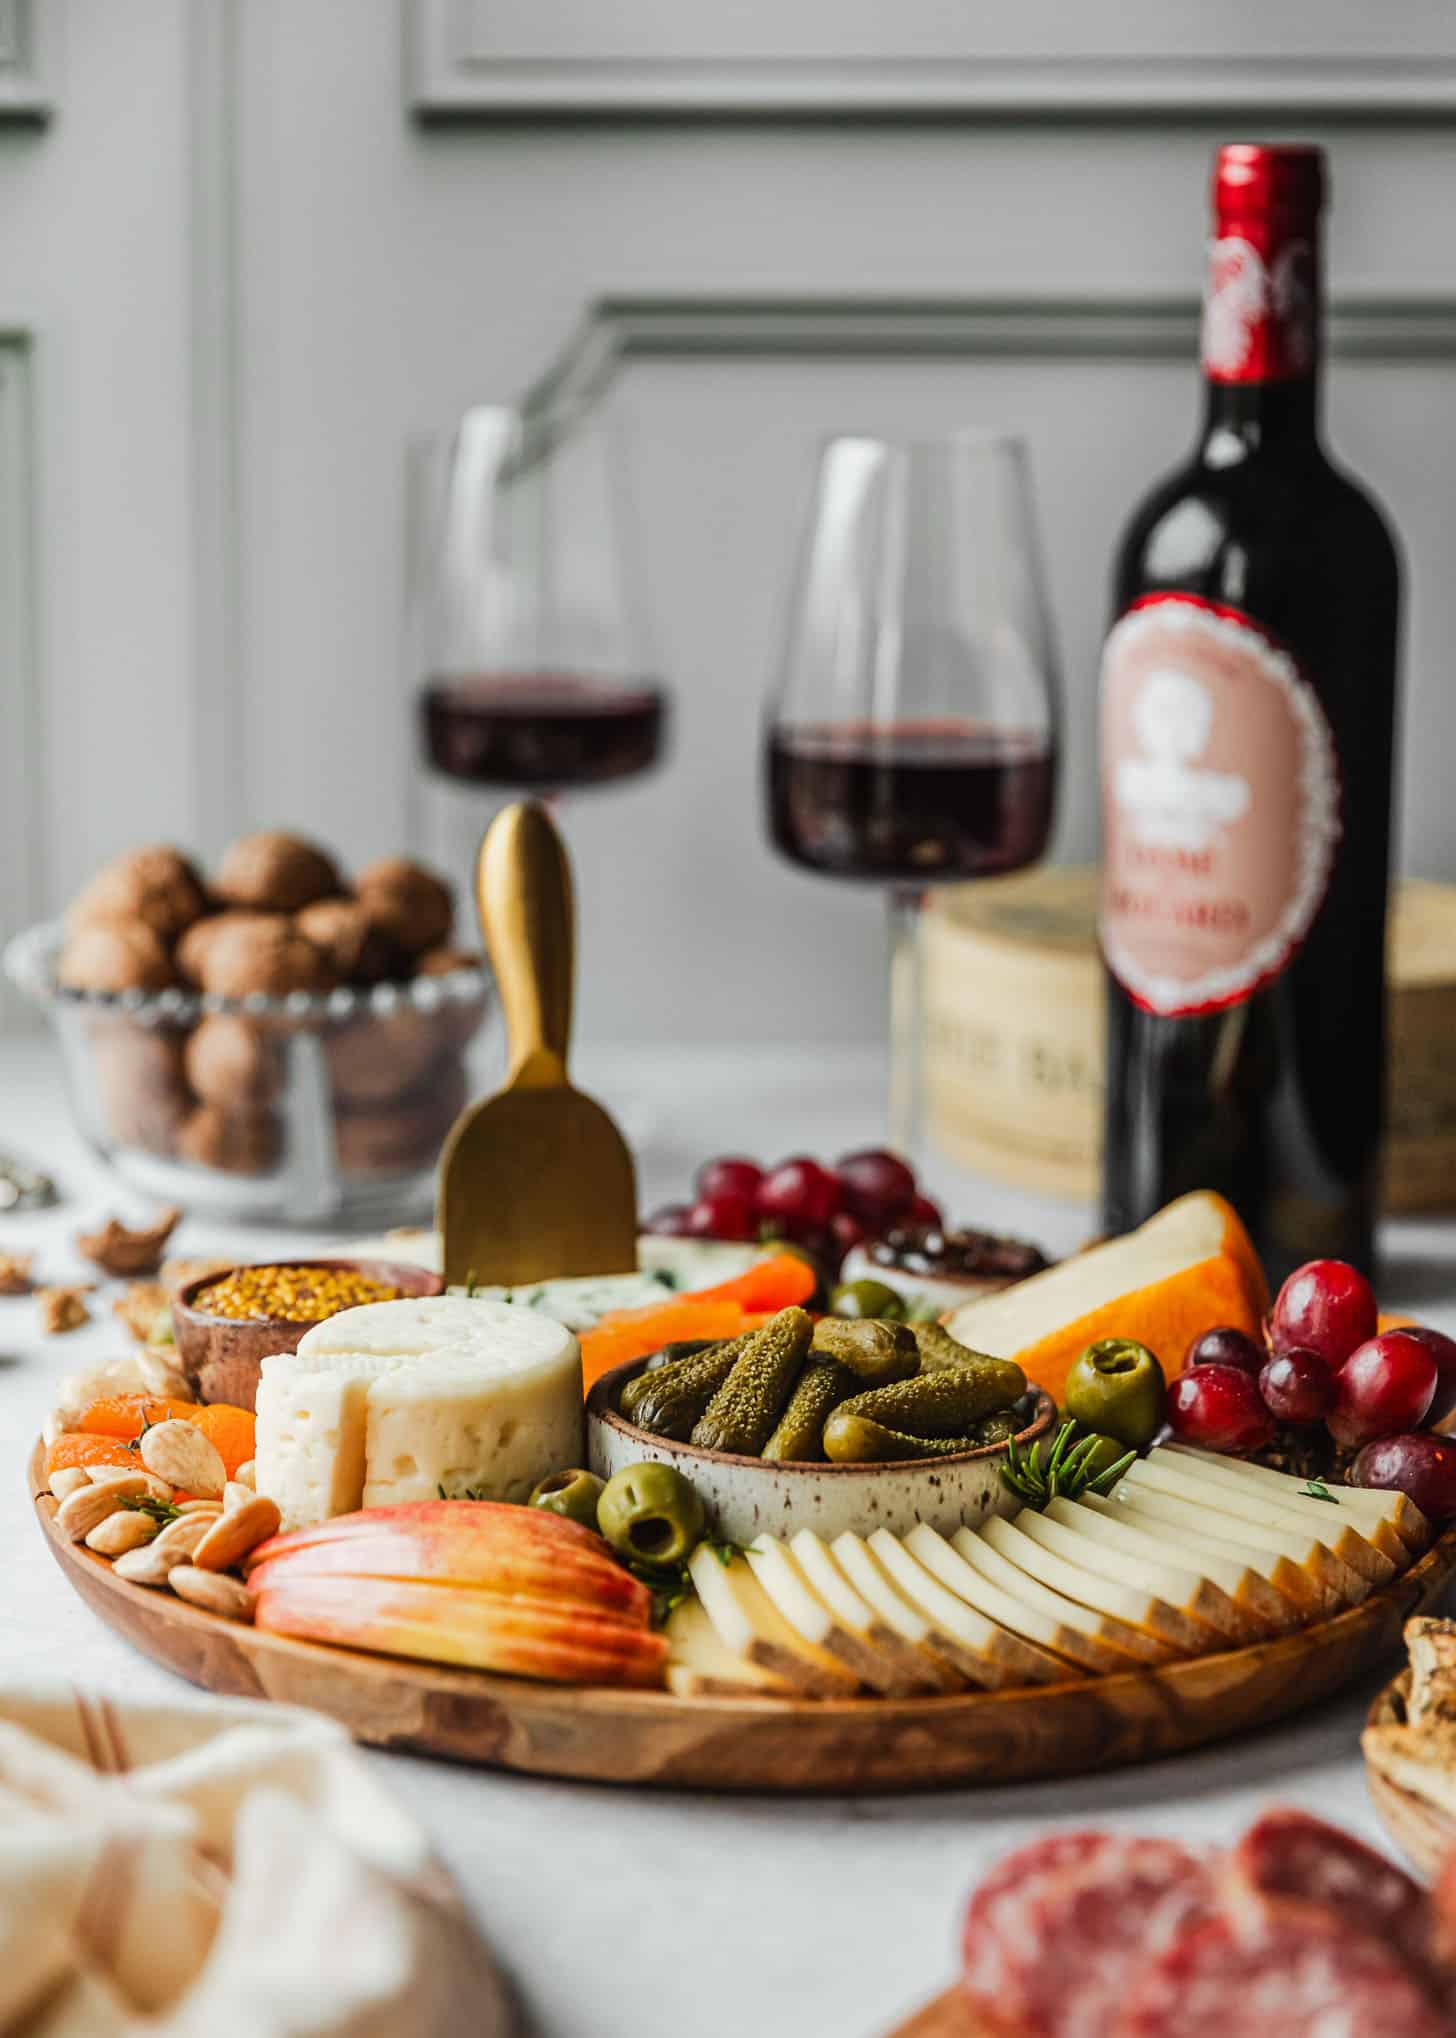 A French cheese board on a white counter next to red wine, a bowl of walnuts, a beige linen, and crackers.